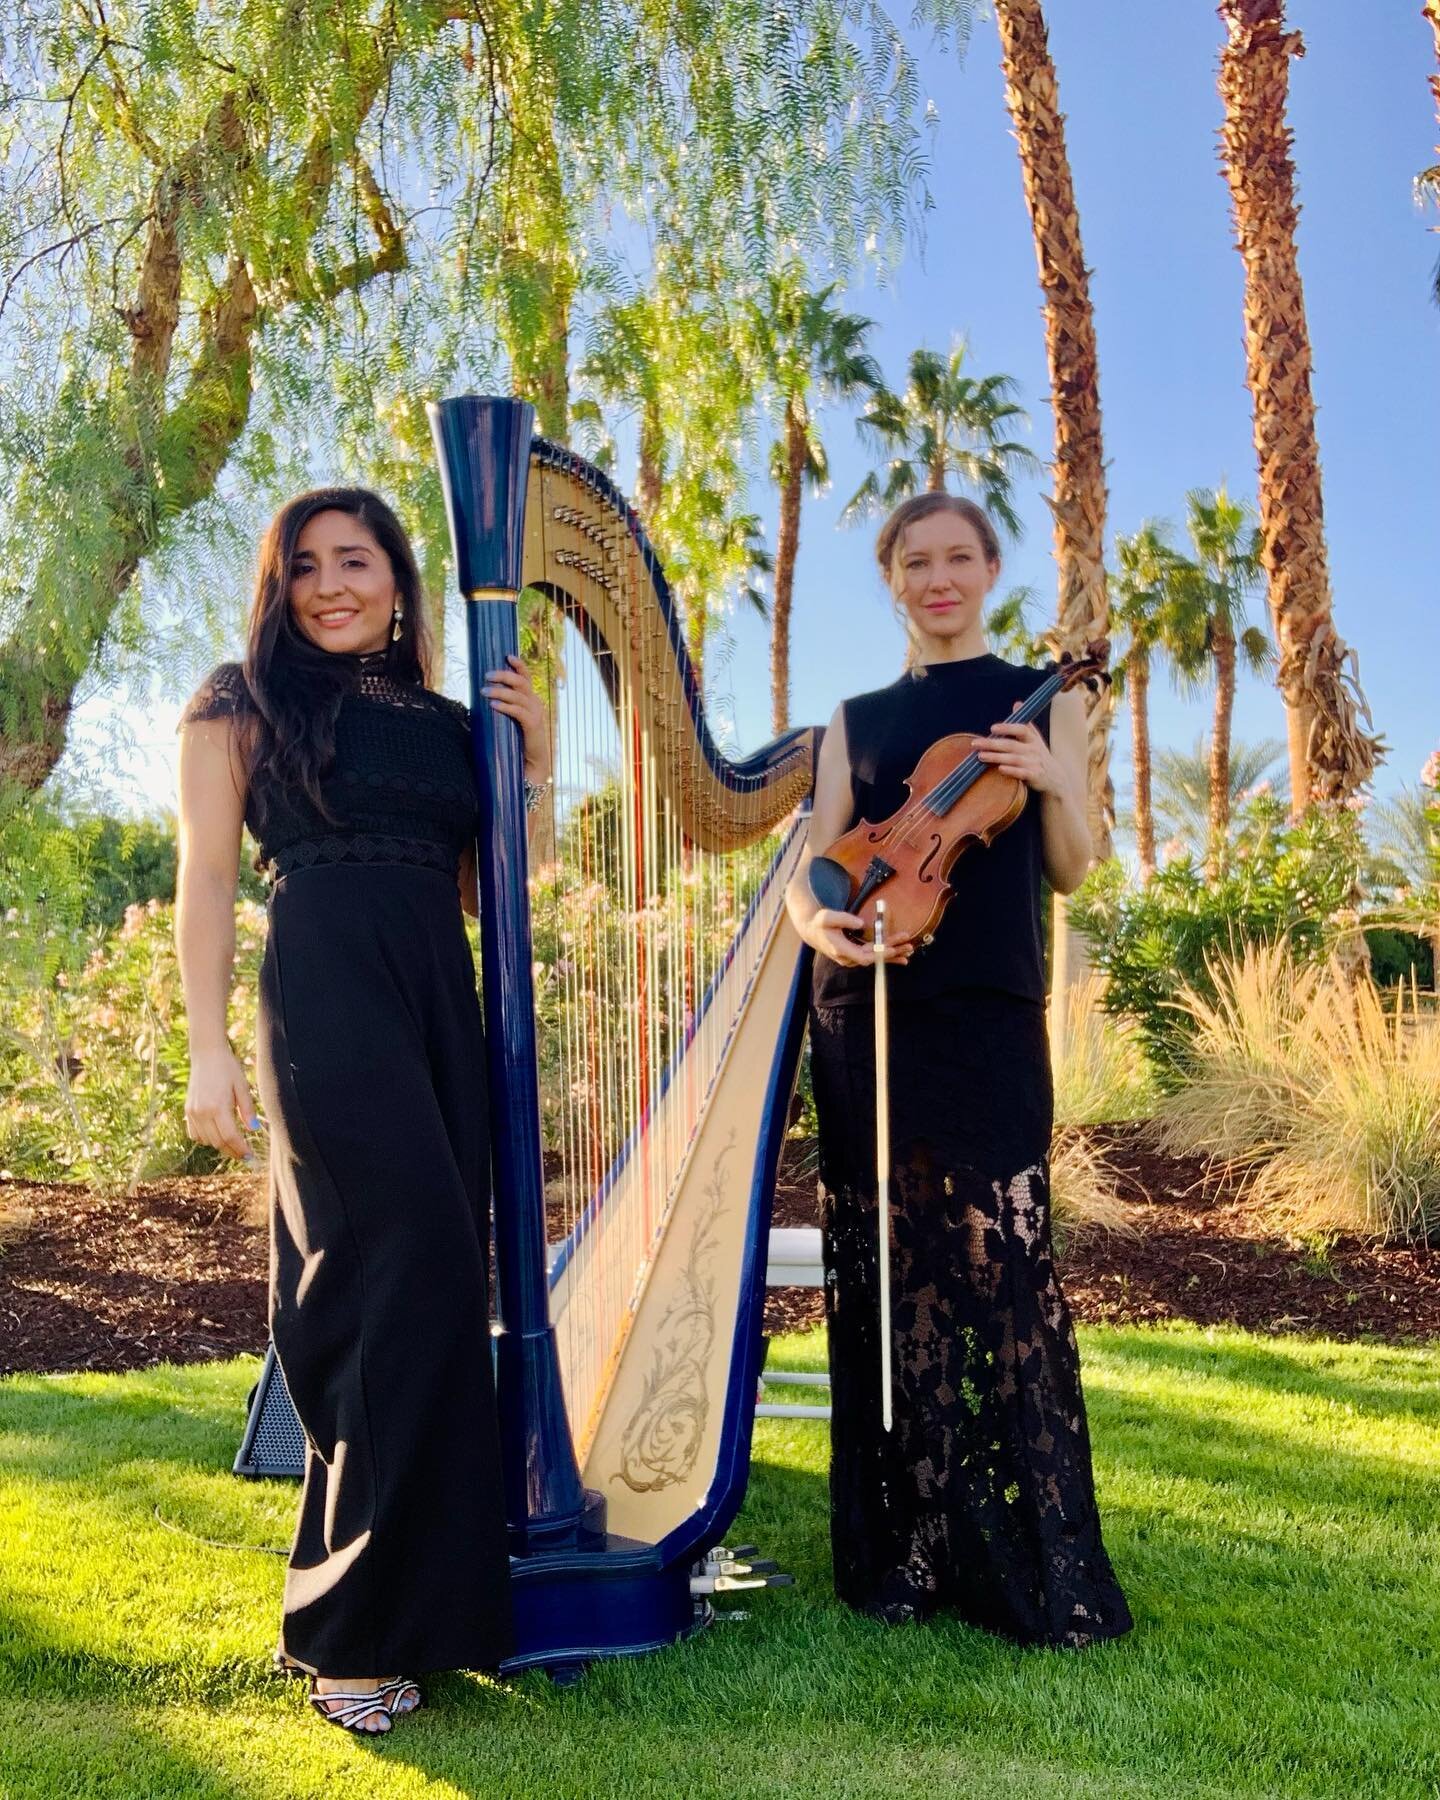 Thank you to @jjthebrizplane and @sasham.chandler for a beautiful Harp and Violin performance for @cojweddings in La Quinta, CA!